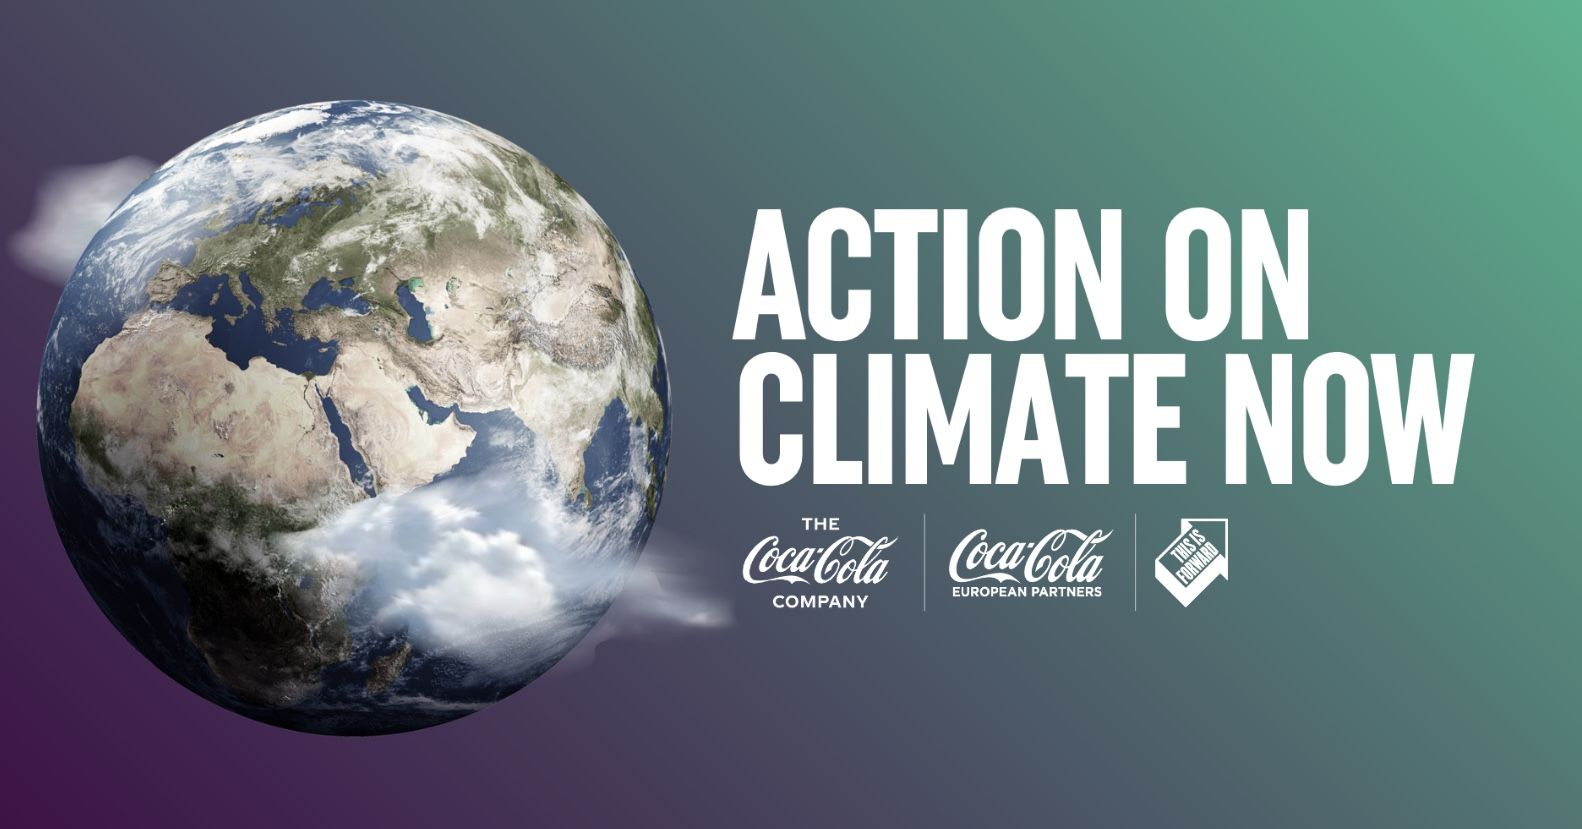 Coca-Cola Europacific Partners committed to Net Zero by 2040